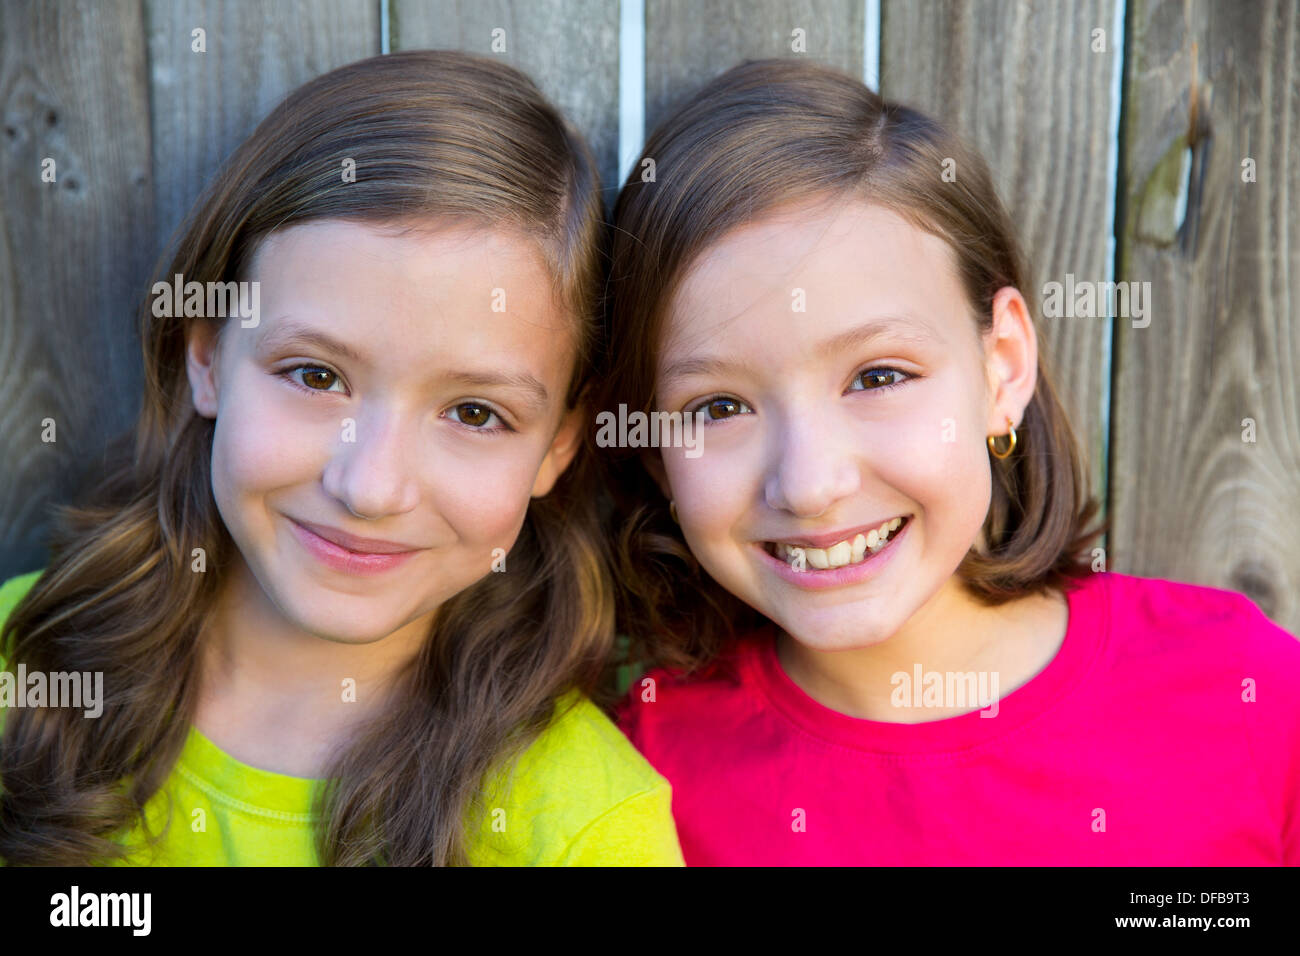 Happy twin sisters with different hairstyle smiling on wood backyard fence Stock Photo